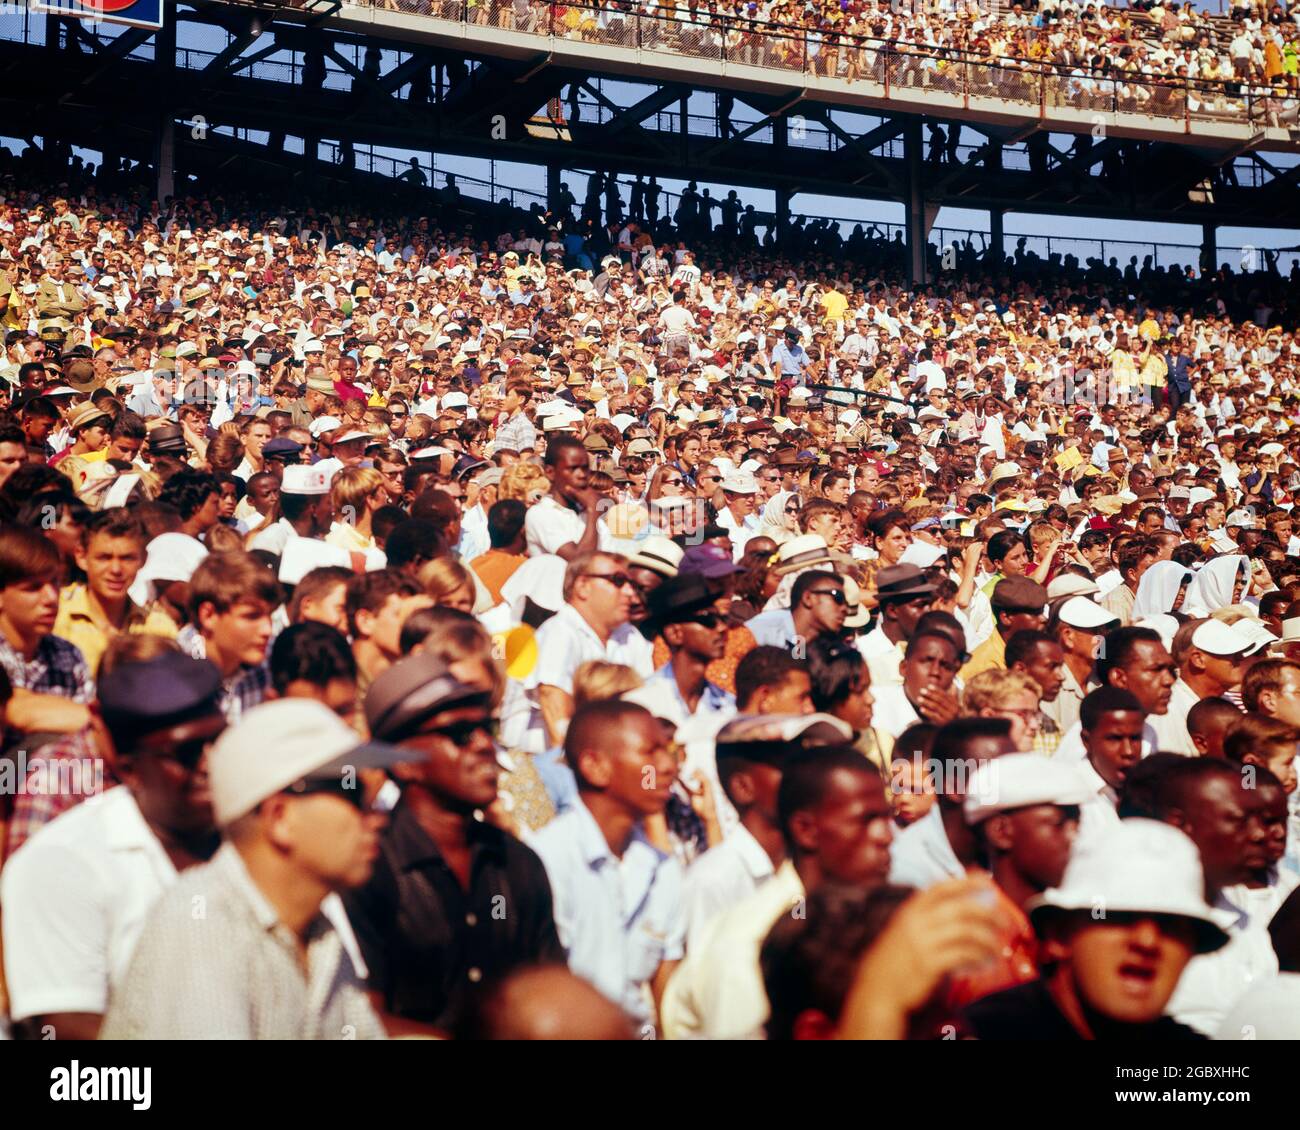 Crowd 1960s High Resolution Stock Photography and Images Alamy